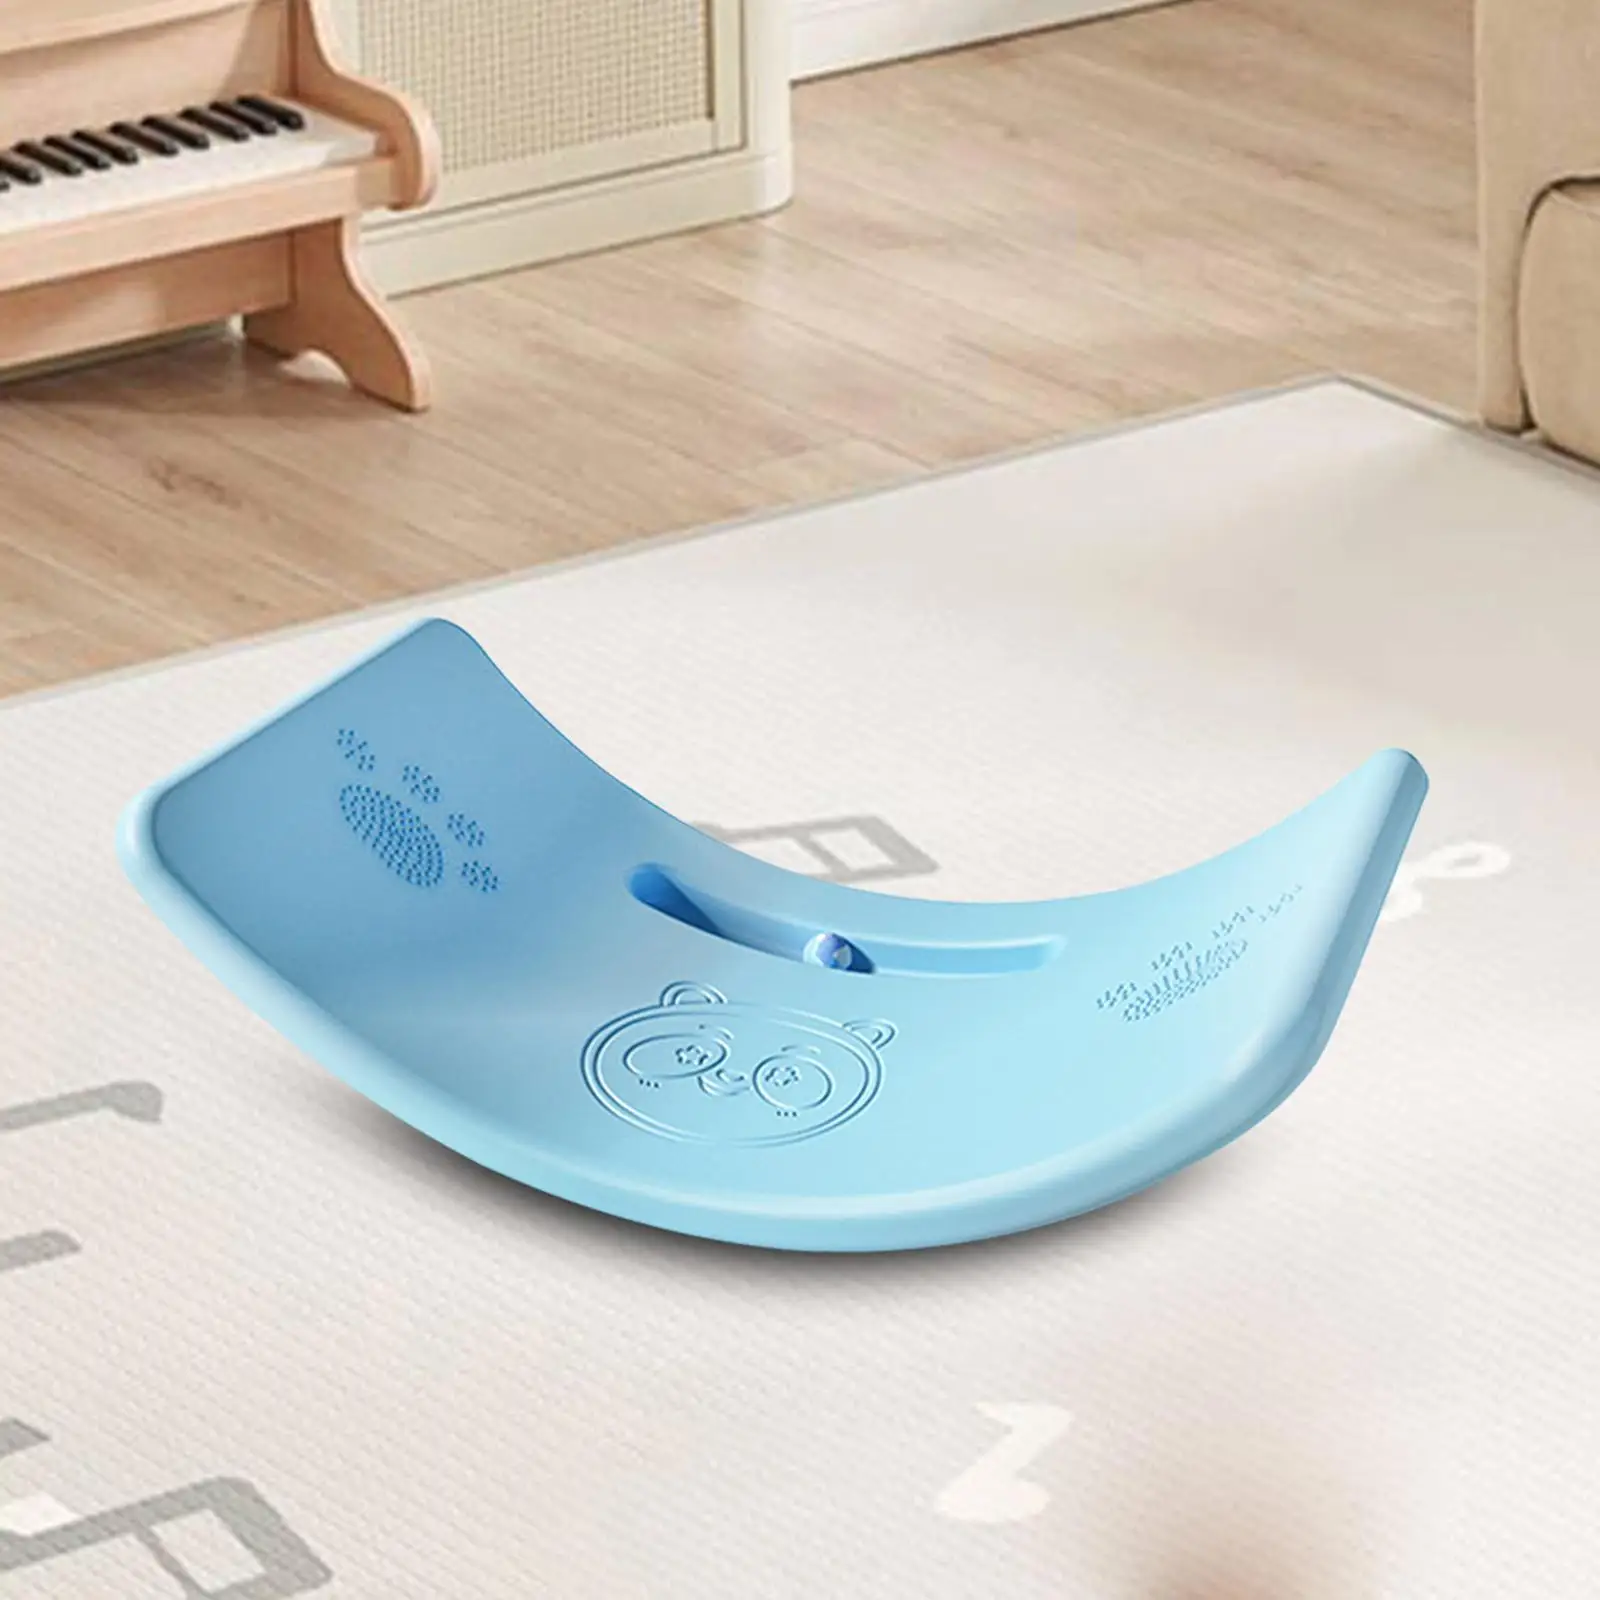 Balance Board Home Exercise Device Sensory Integration Training Equipment 35 Degree Curved Wobble Board Balancing Trainer